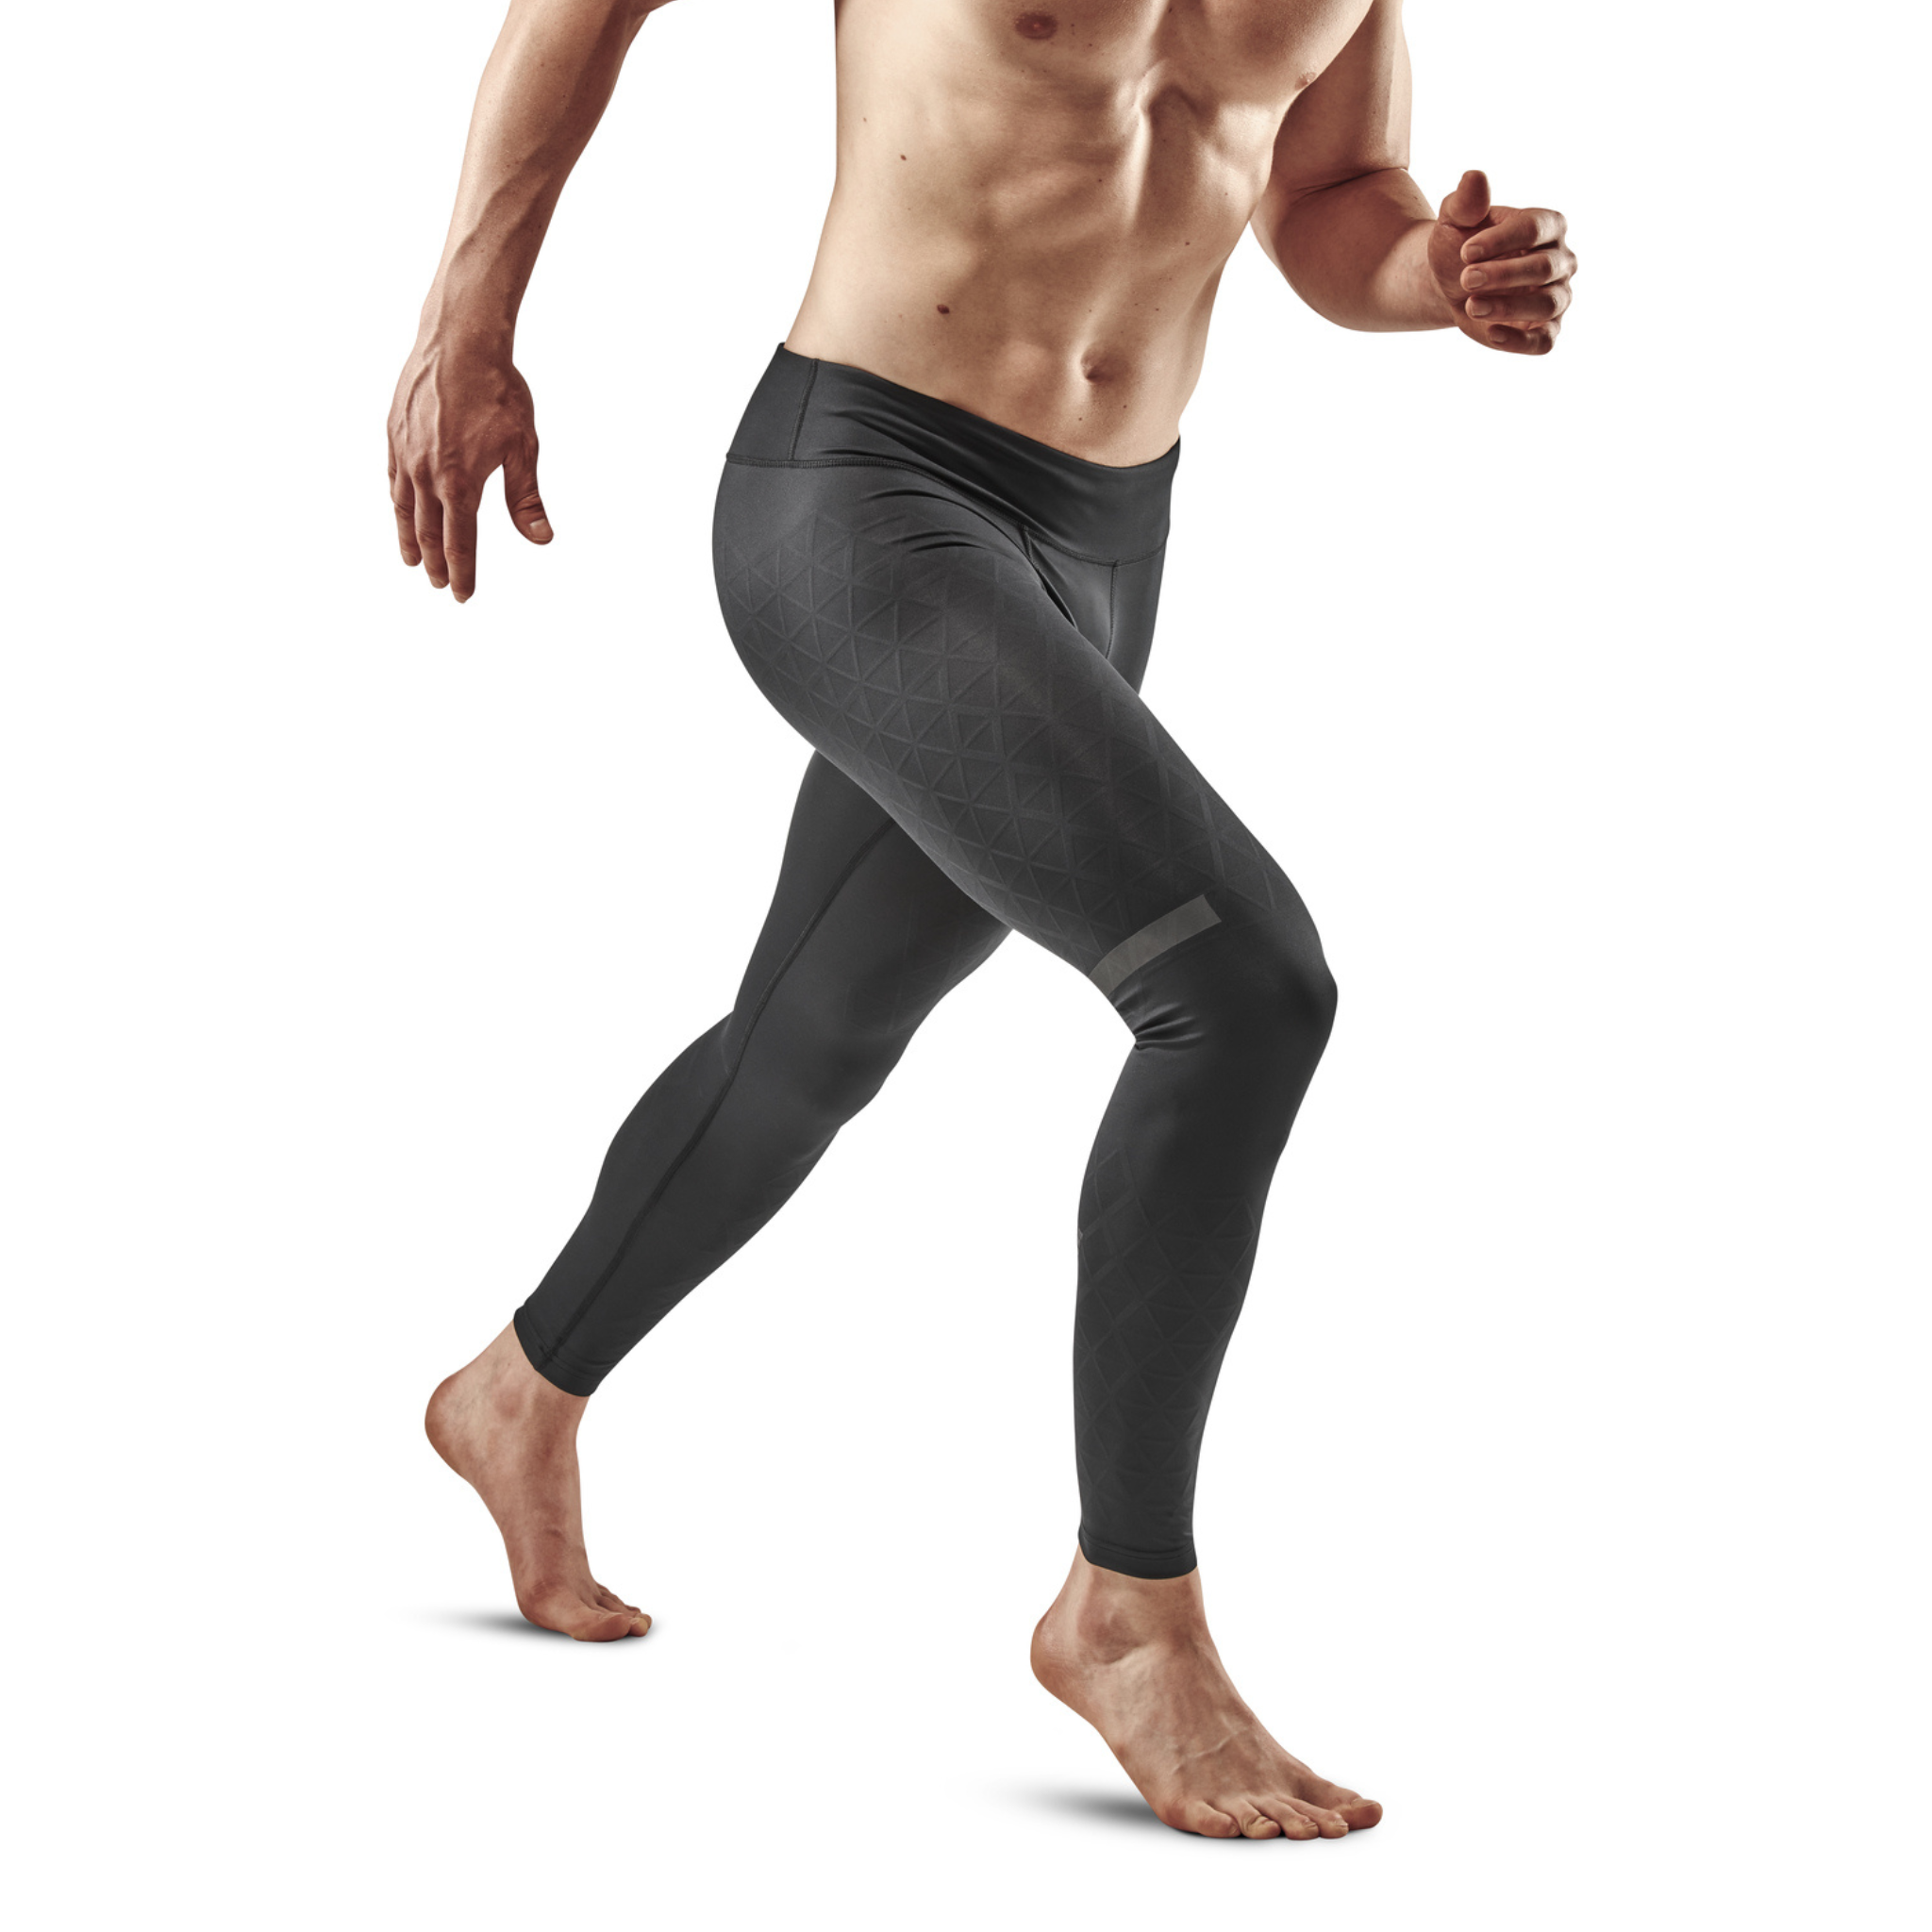 Men PRO v2 Mid Length Running Tights for Training & Racing (Carbon) –  Purpose Performance Wear